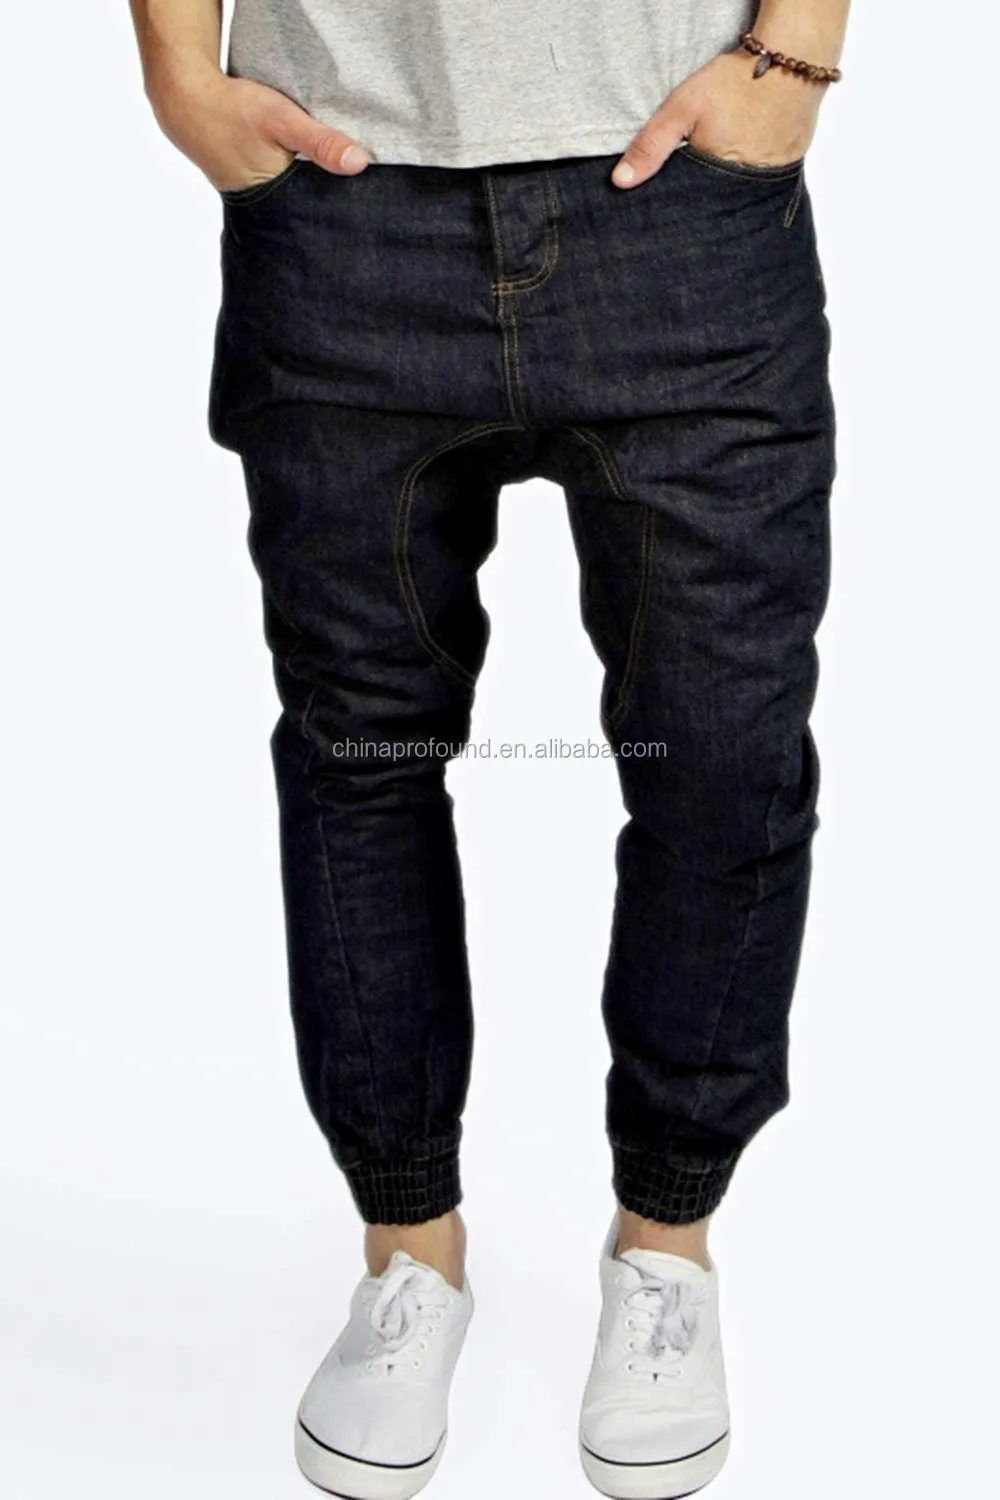 balloon jeans for mens